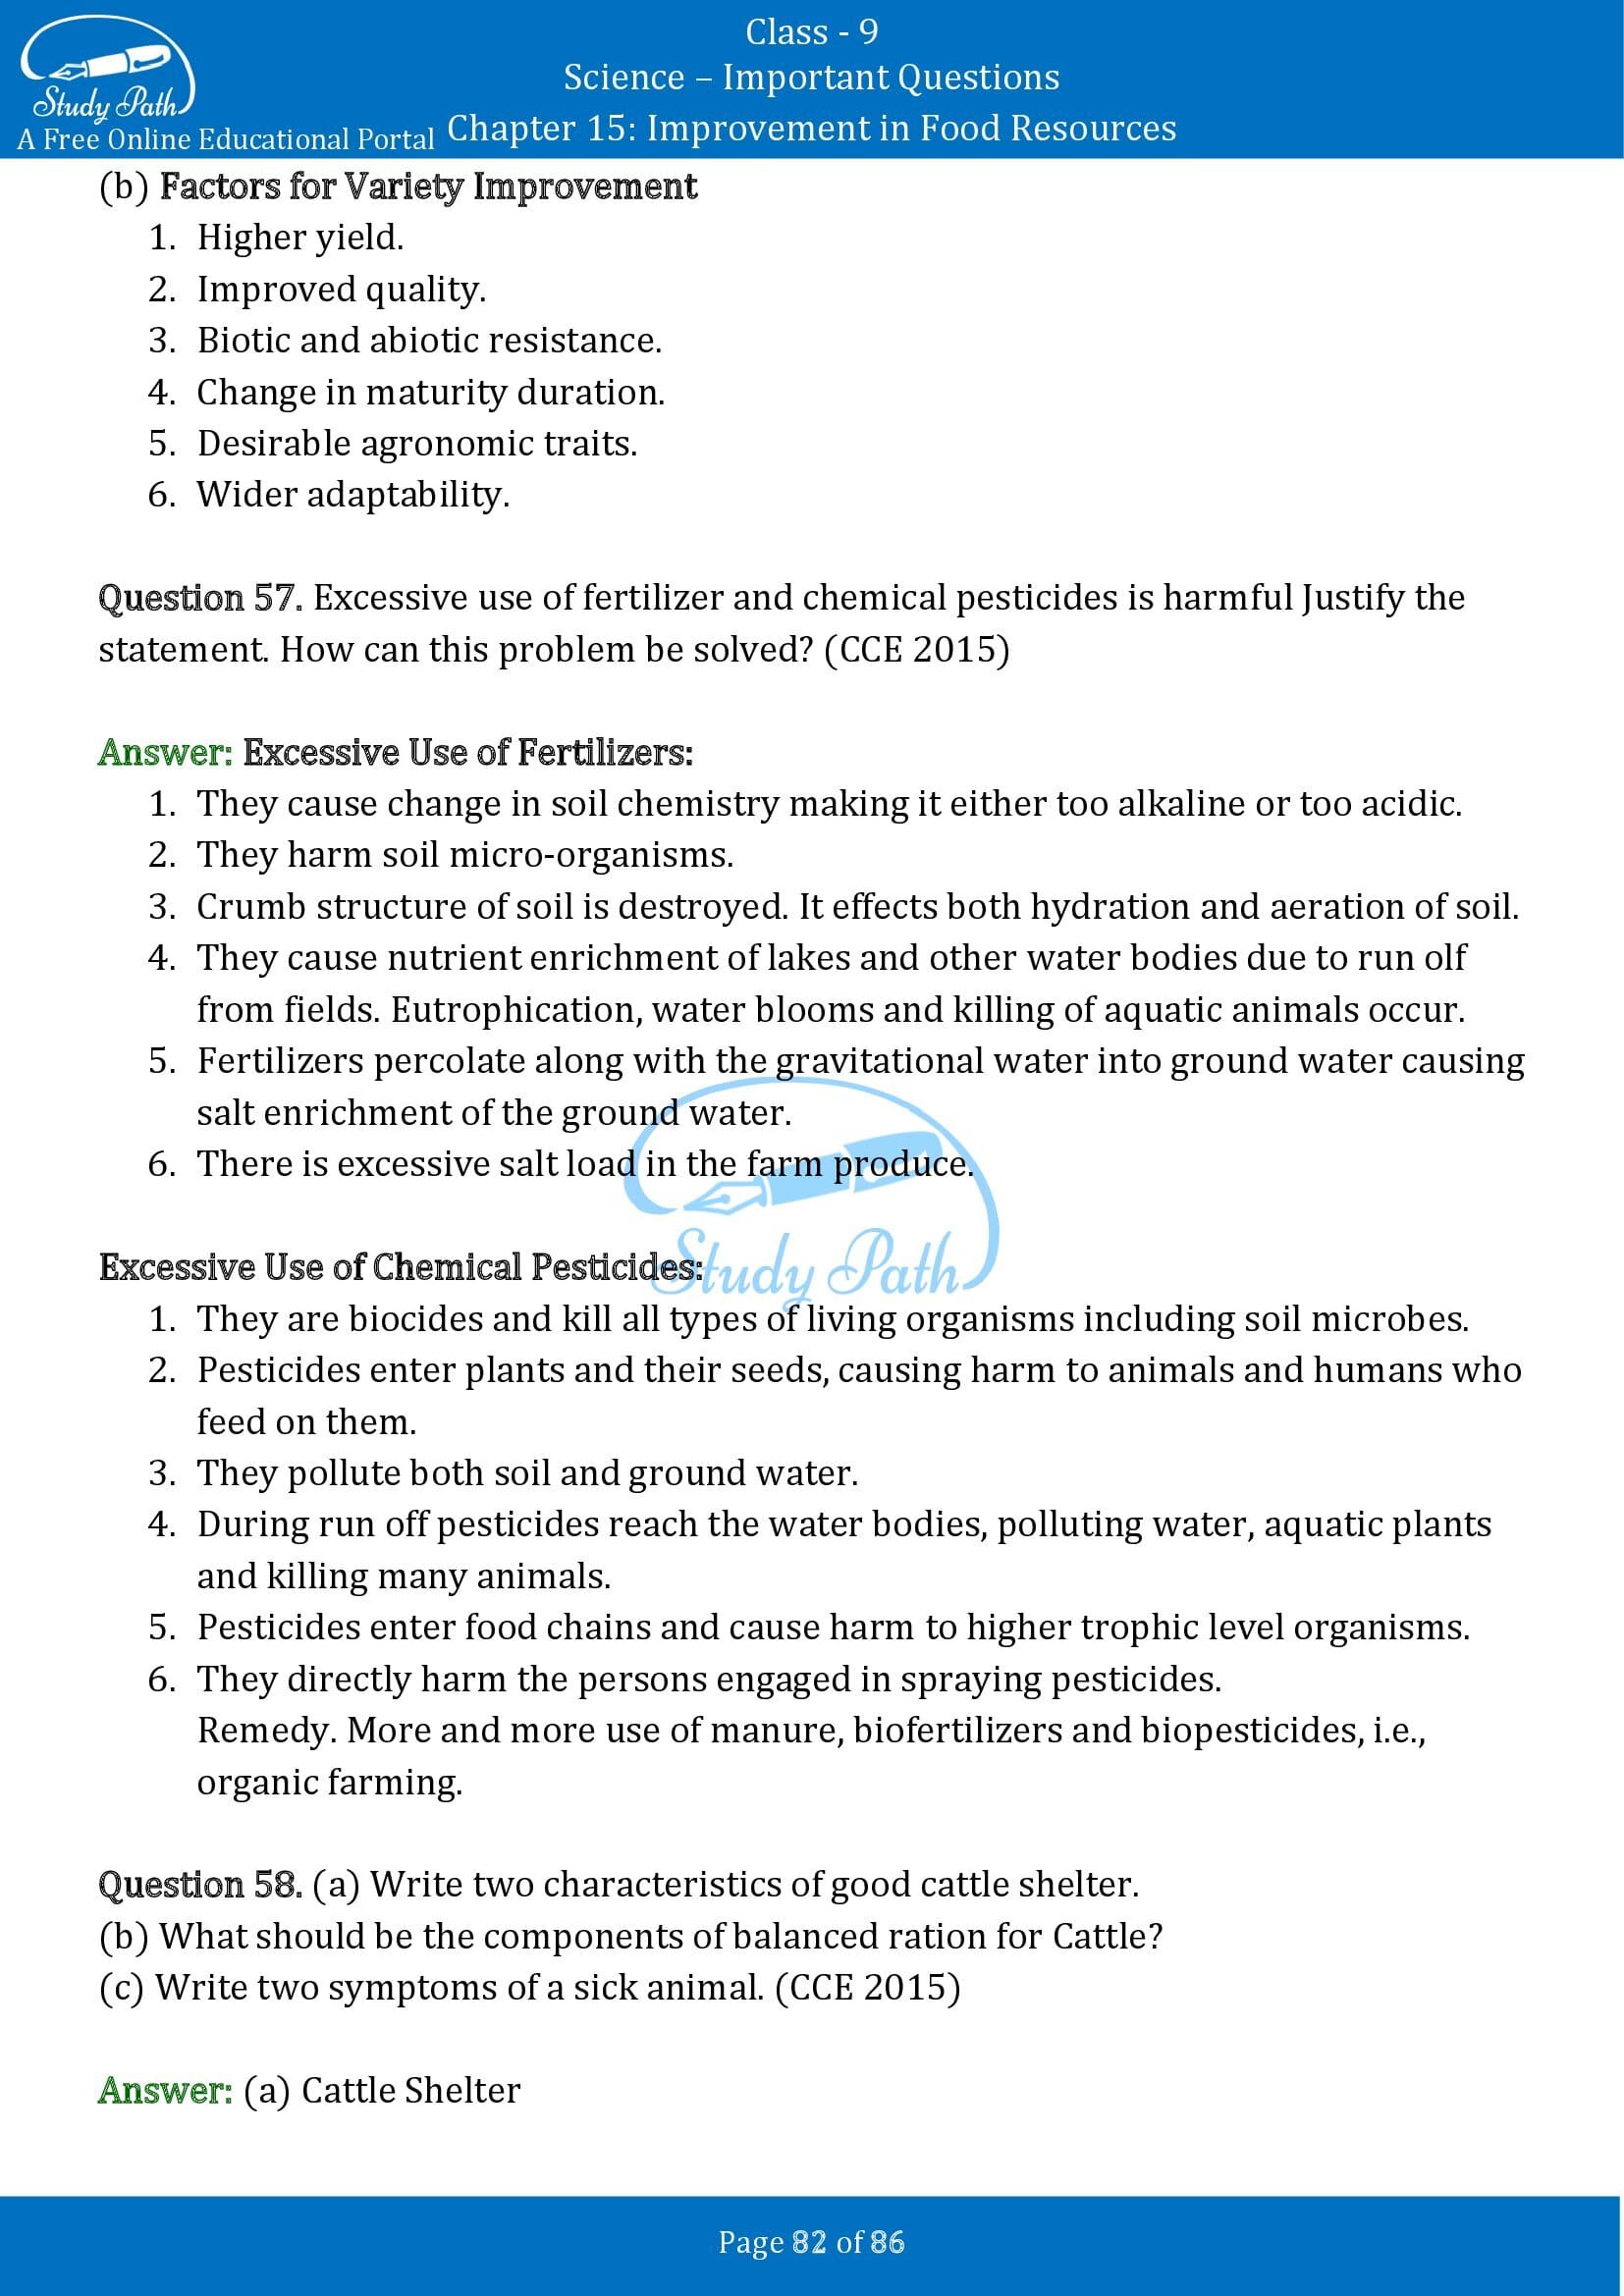 Important Questions for Class 9 Science Chapter 15 Improvement in Food Resources 00082